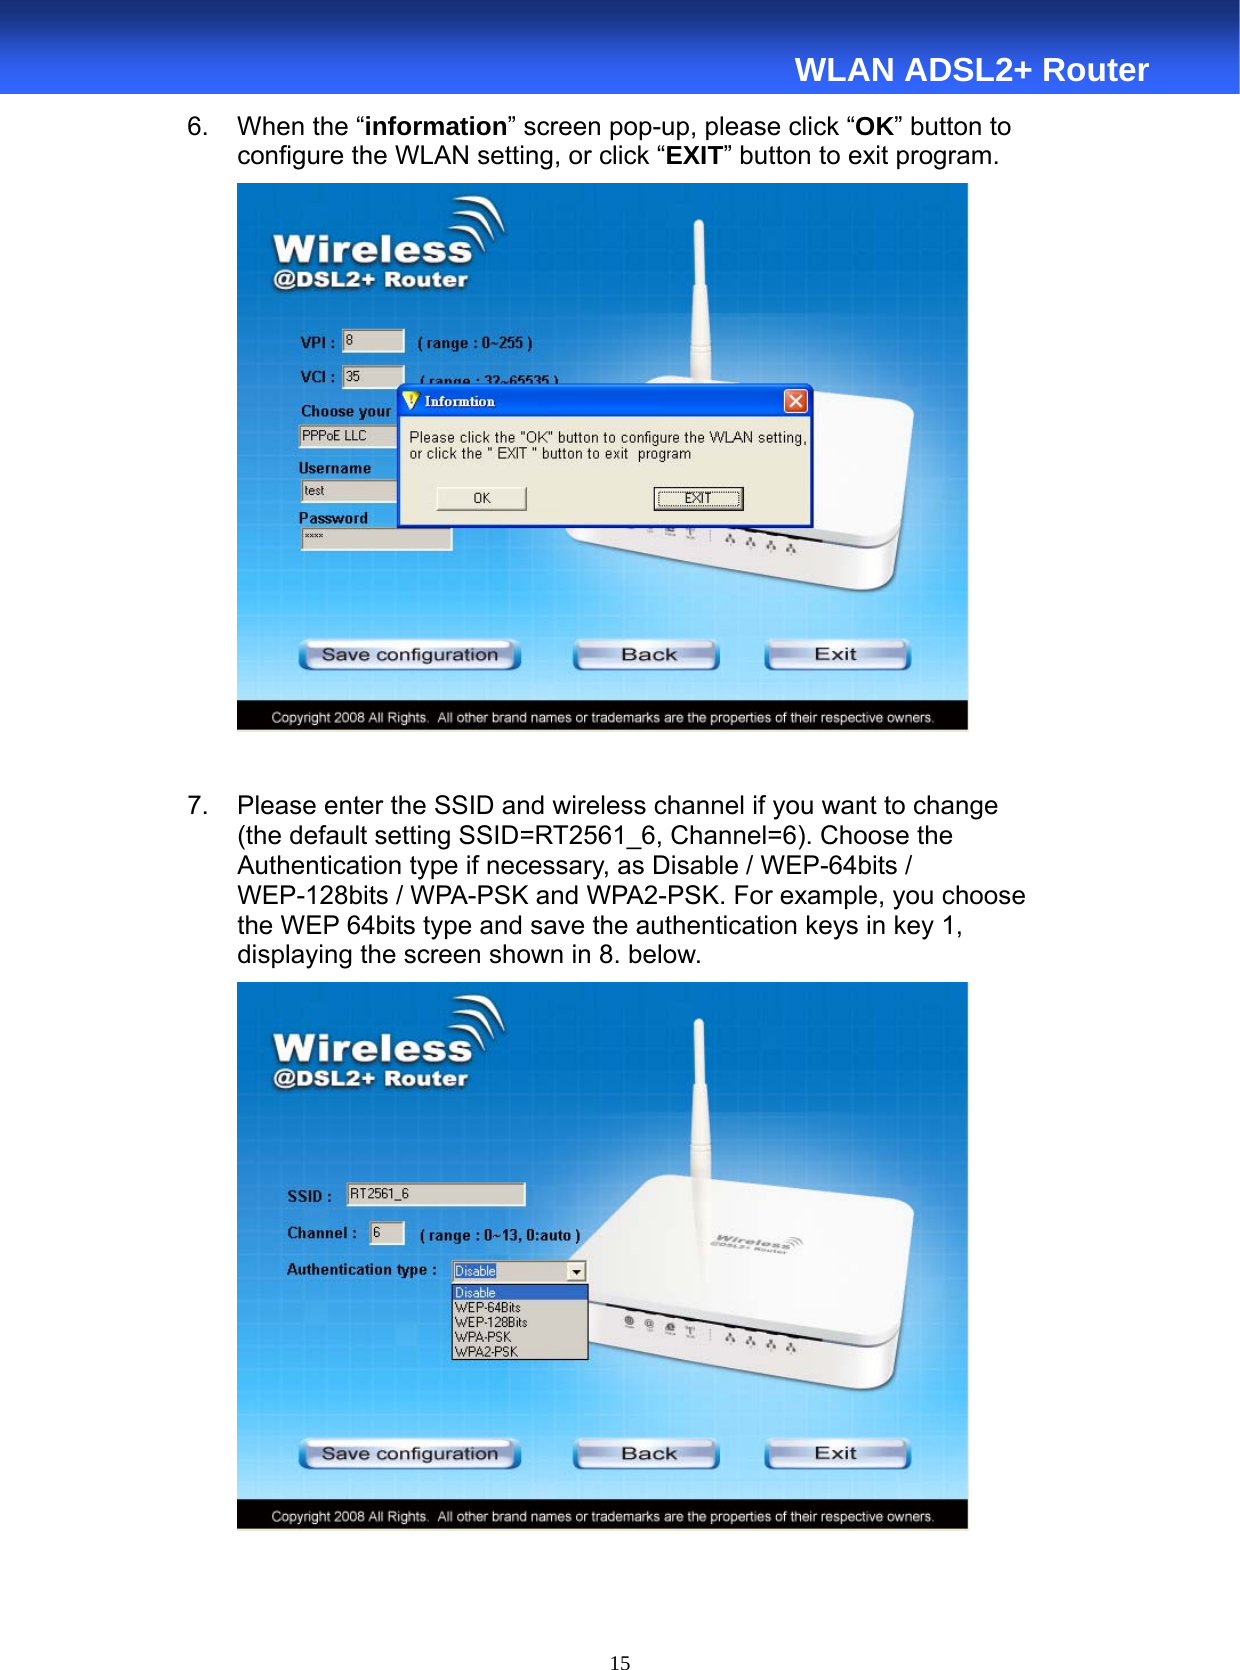  15  WLAN ADSL2+ Router 6.  When the “information” screen pop-up, please click “OK” button to    configure the WLAN setting, or click “EXIT” button to exit program.   7.  Please enter the SSID and wireless channel if you want to change         (the default setting SSID=RT2561_6, Channel=6). Choose the         Authentication type if necessary, as Disable / WEP-64bits /     WEP-128bits / WPA-PSK and WPA2-PSK. For example, you choose       the WEP 64bits type and save the authentication keys in key 1,         displaying the screen shown in 8. below.    